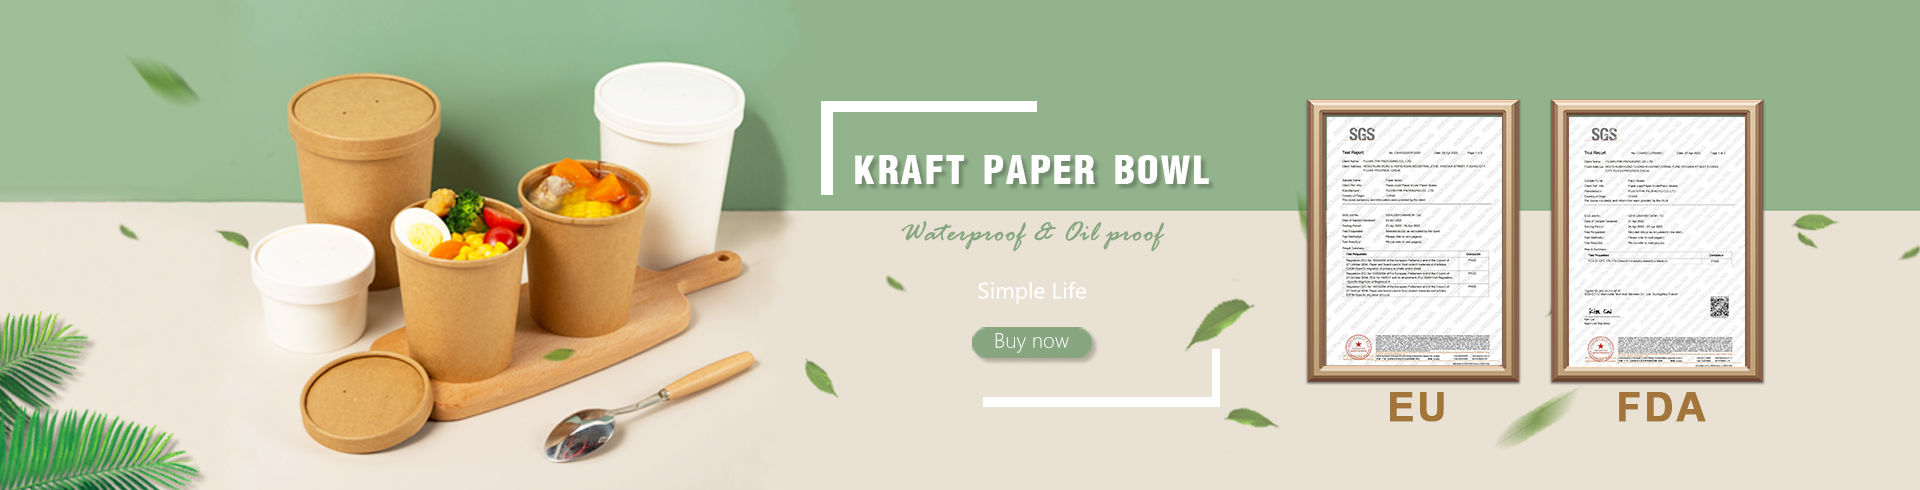 Kraft paper noodle box is certified by FDA and EU, and its quality is safe and reliable